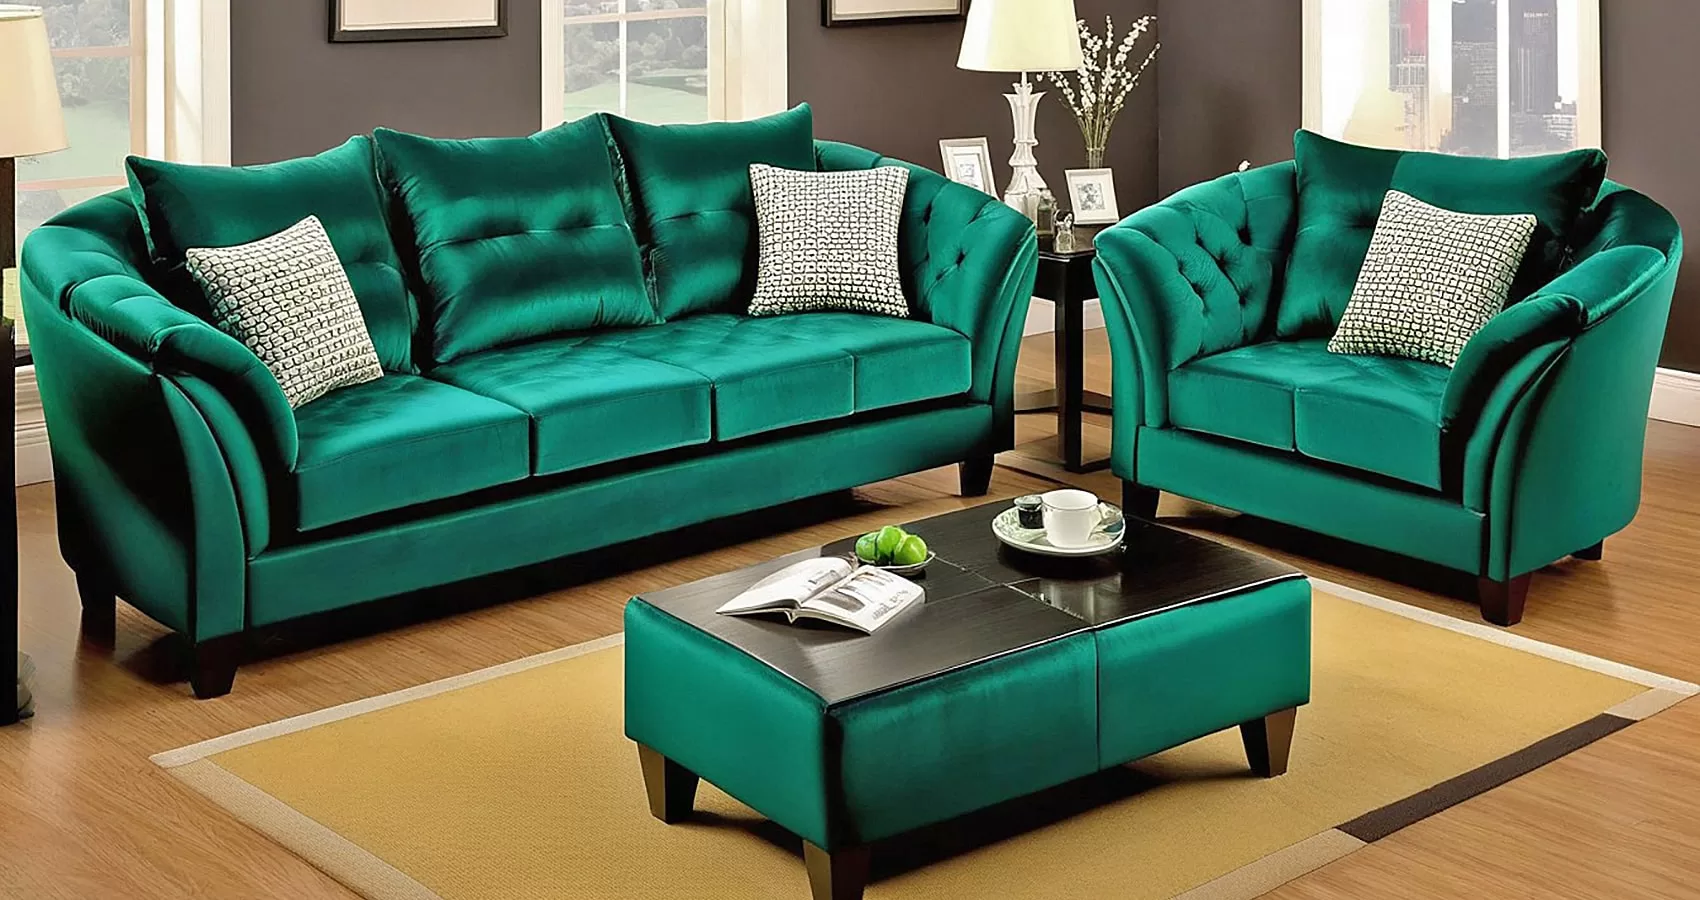 Green Couch | Green Sofa: Allure of Green